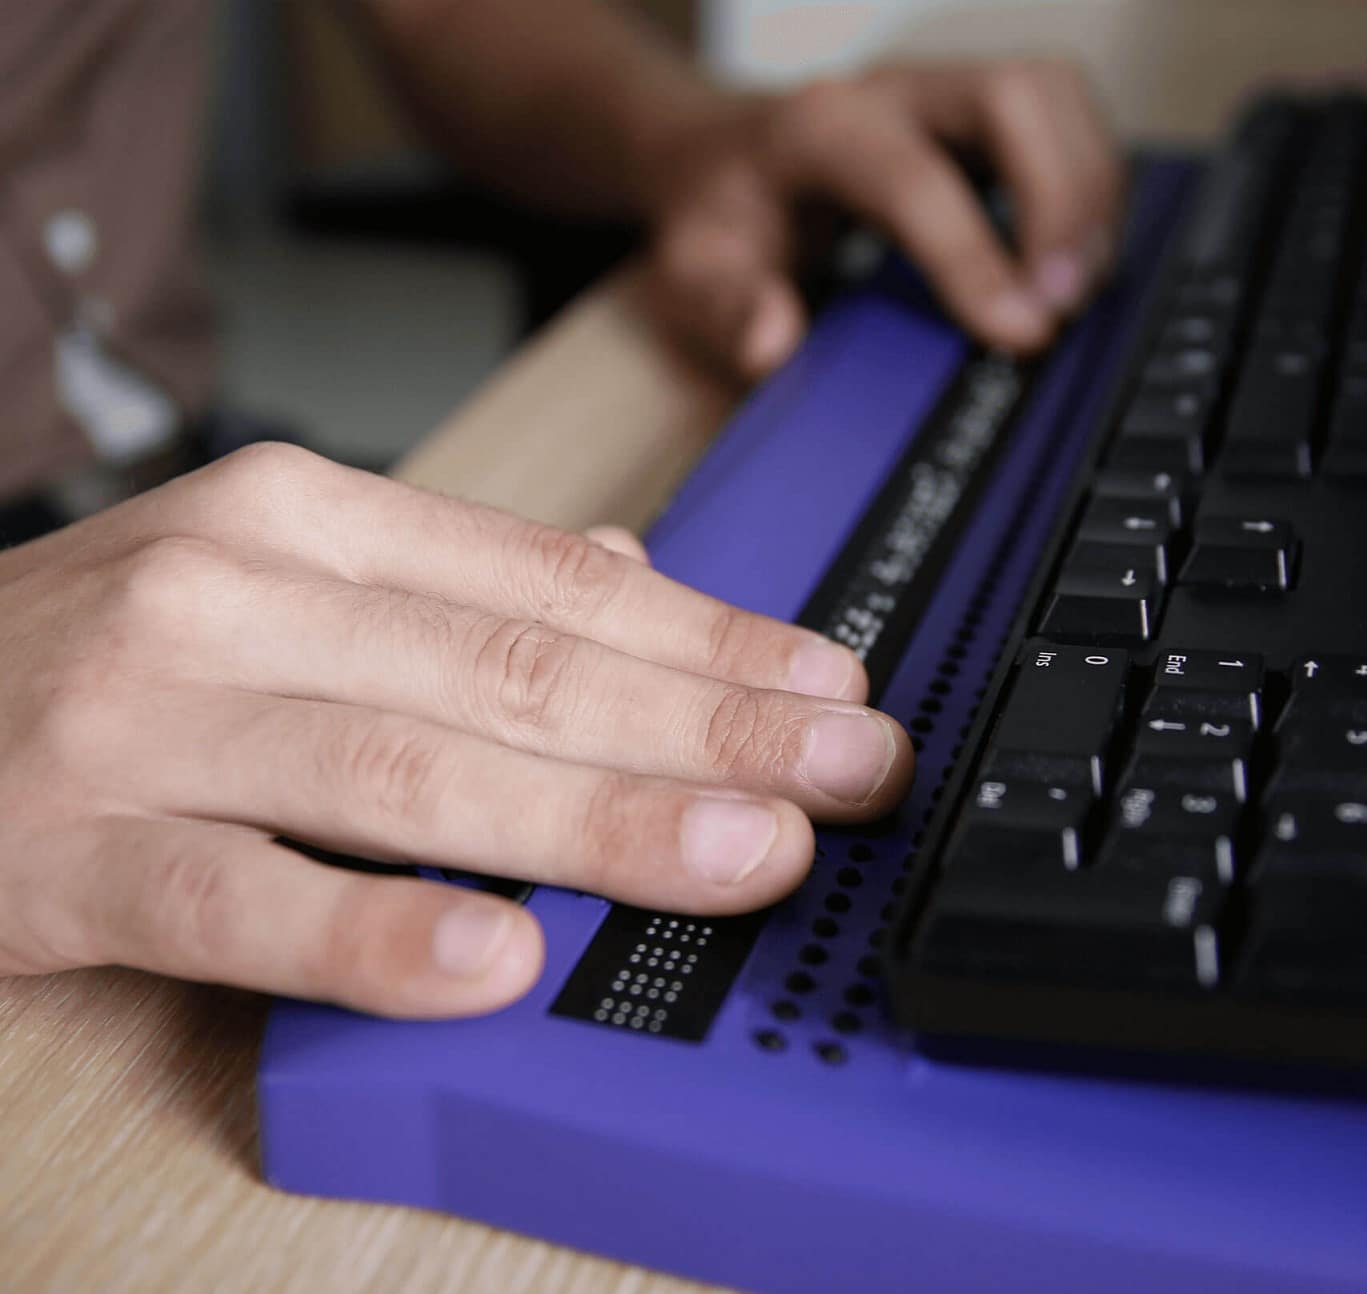 Person Using a Braile Device on a Keyboard